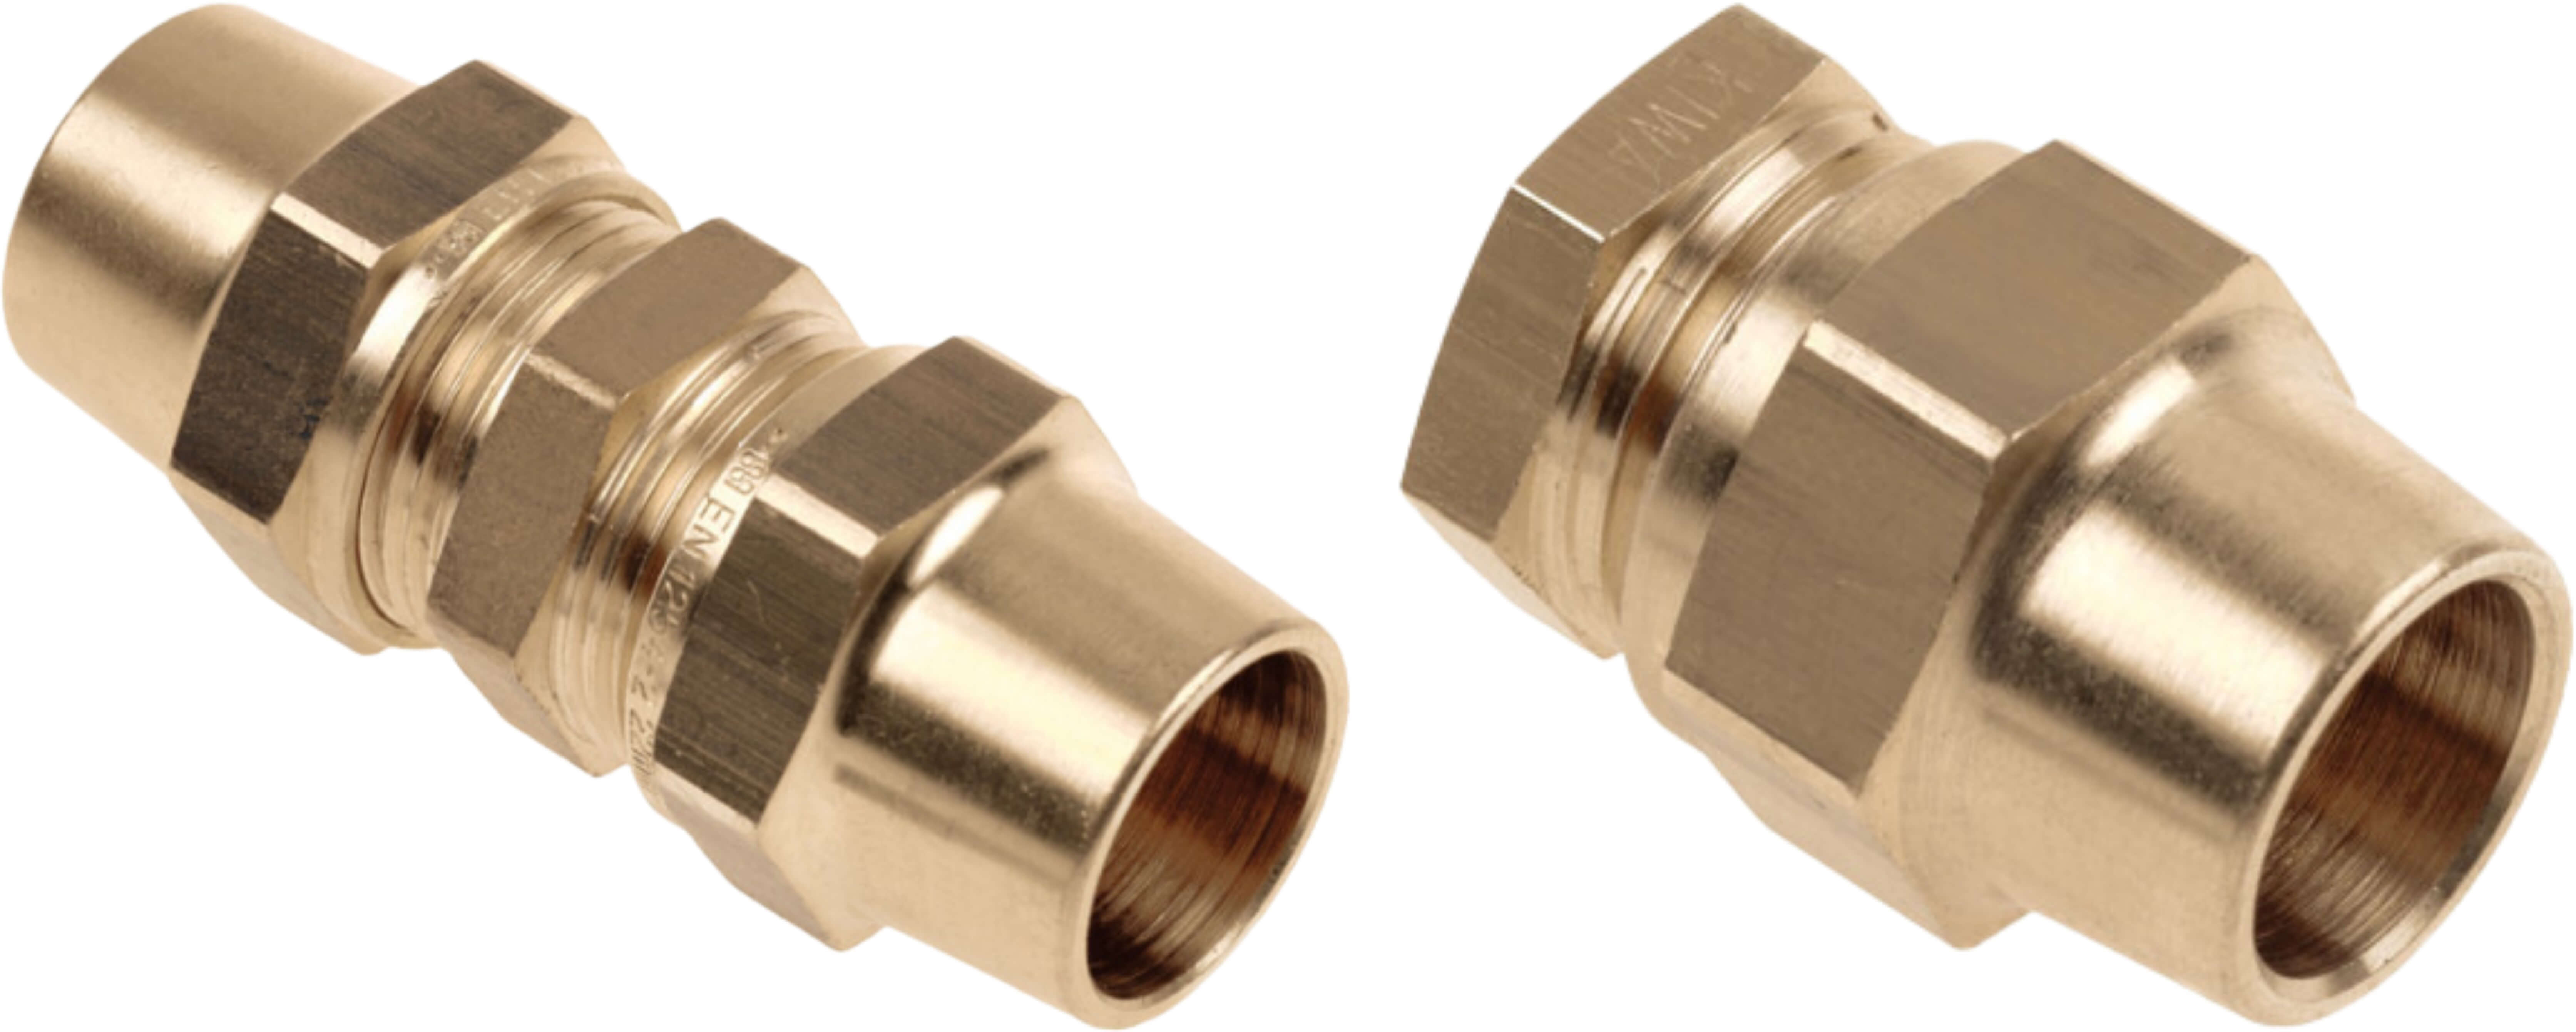 Belgas compression fittings